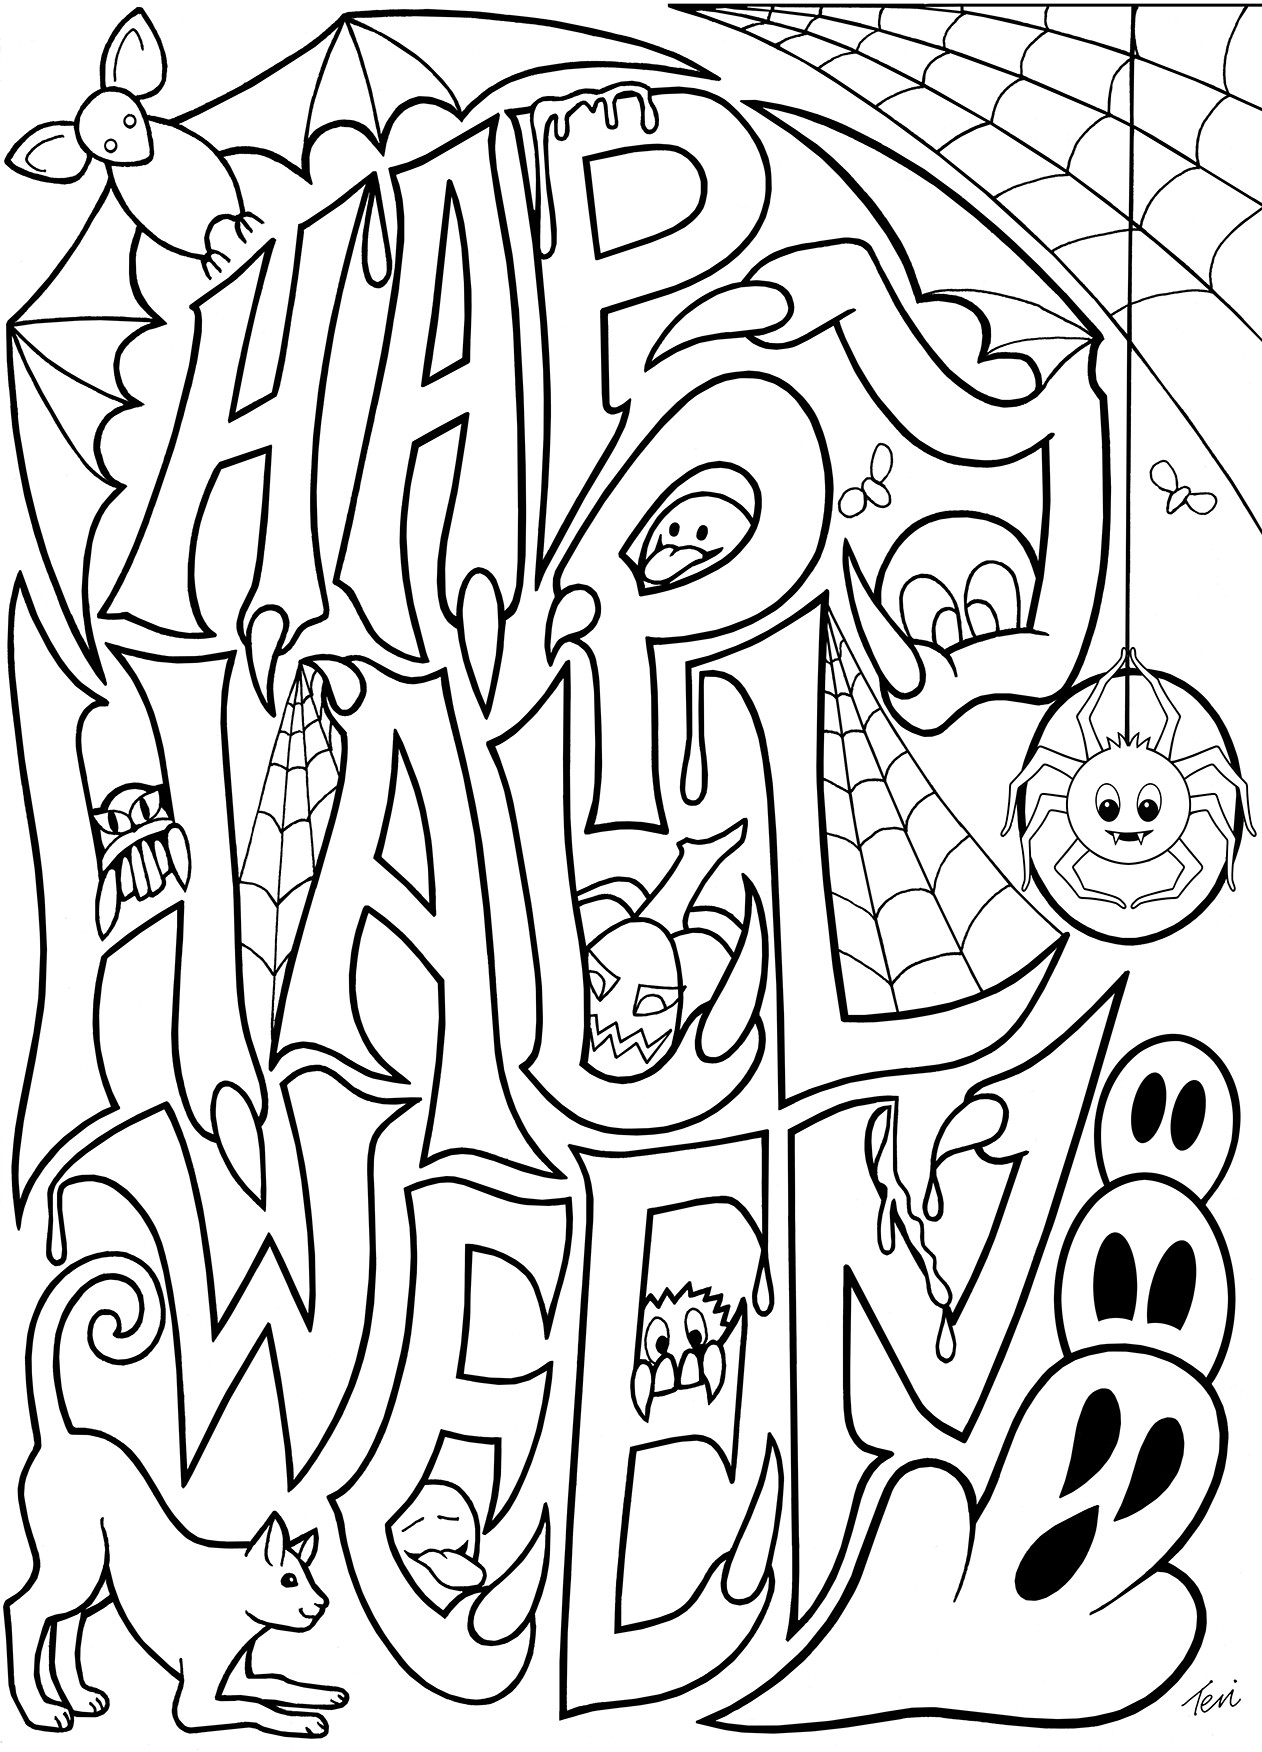 Coloring Pages For Kids Halloween
 Free Adult Coloring Book Pages Happy Halloween by Blue